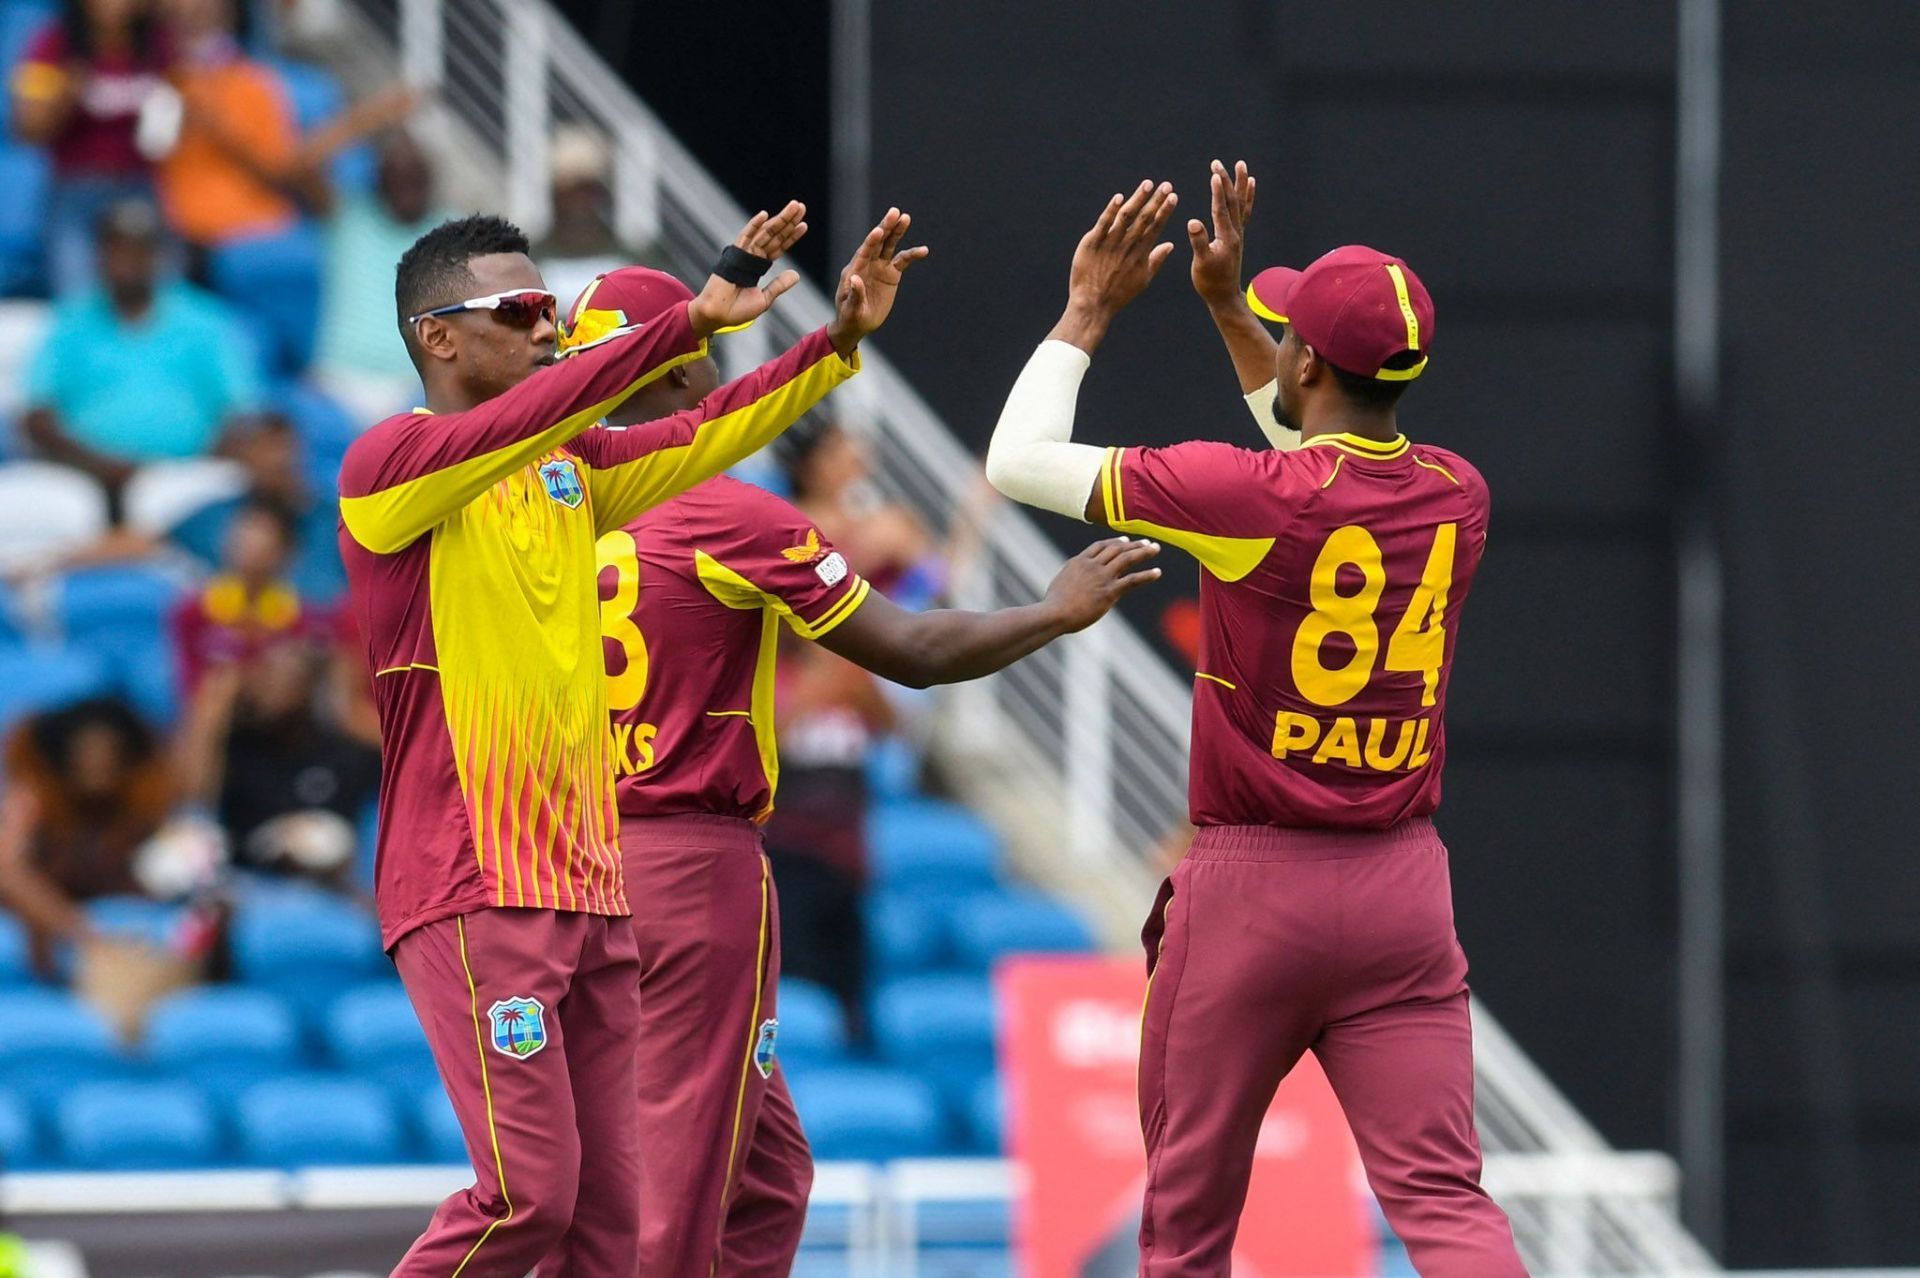 West Indies were fined 20 percent of their match fees. (Credits: Twitter)